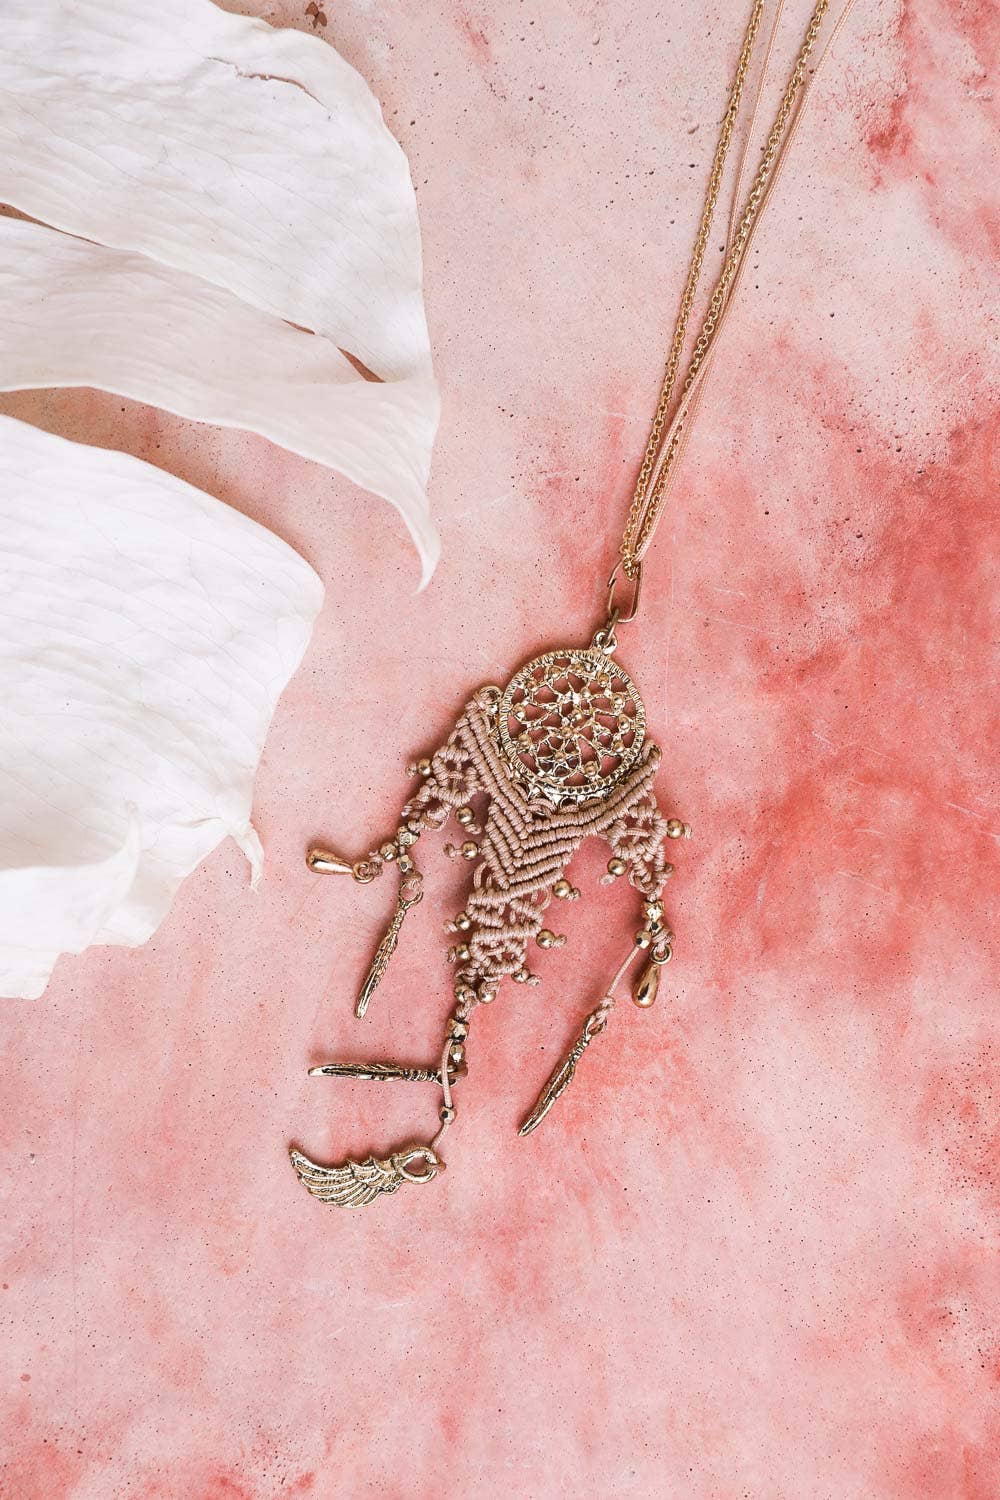 Boho Dream Weave Necklace: Dangling charms, intricate pendant weaving. Elevate your style with this mystique dreamcatcher. Shop now for timeless bohemian charm.